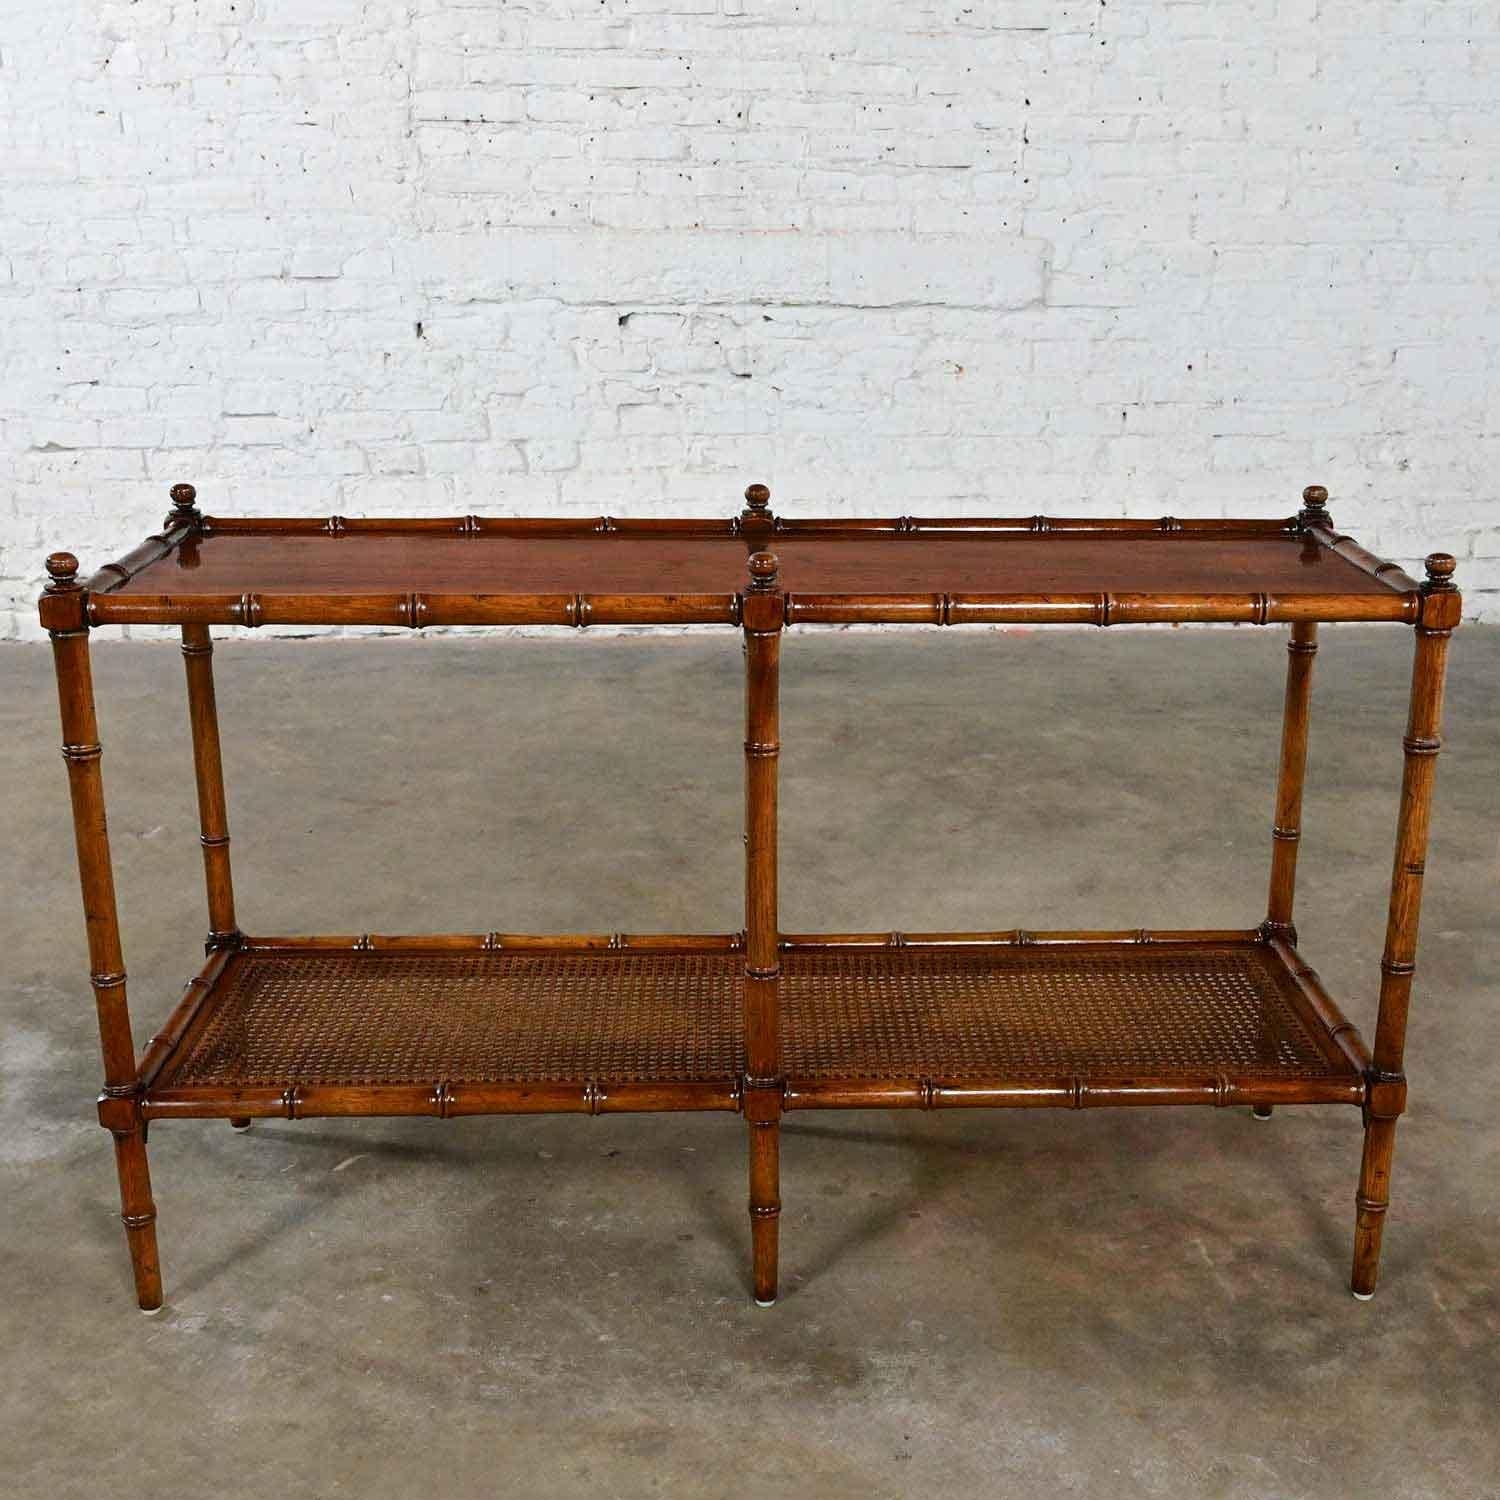 Vintage Henredon Campaign Hollywood Regency Faux Bamboo Cane Sofa Console Table 1